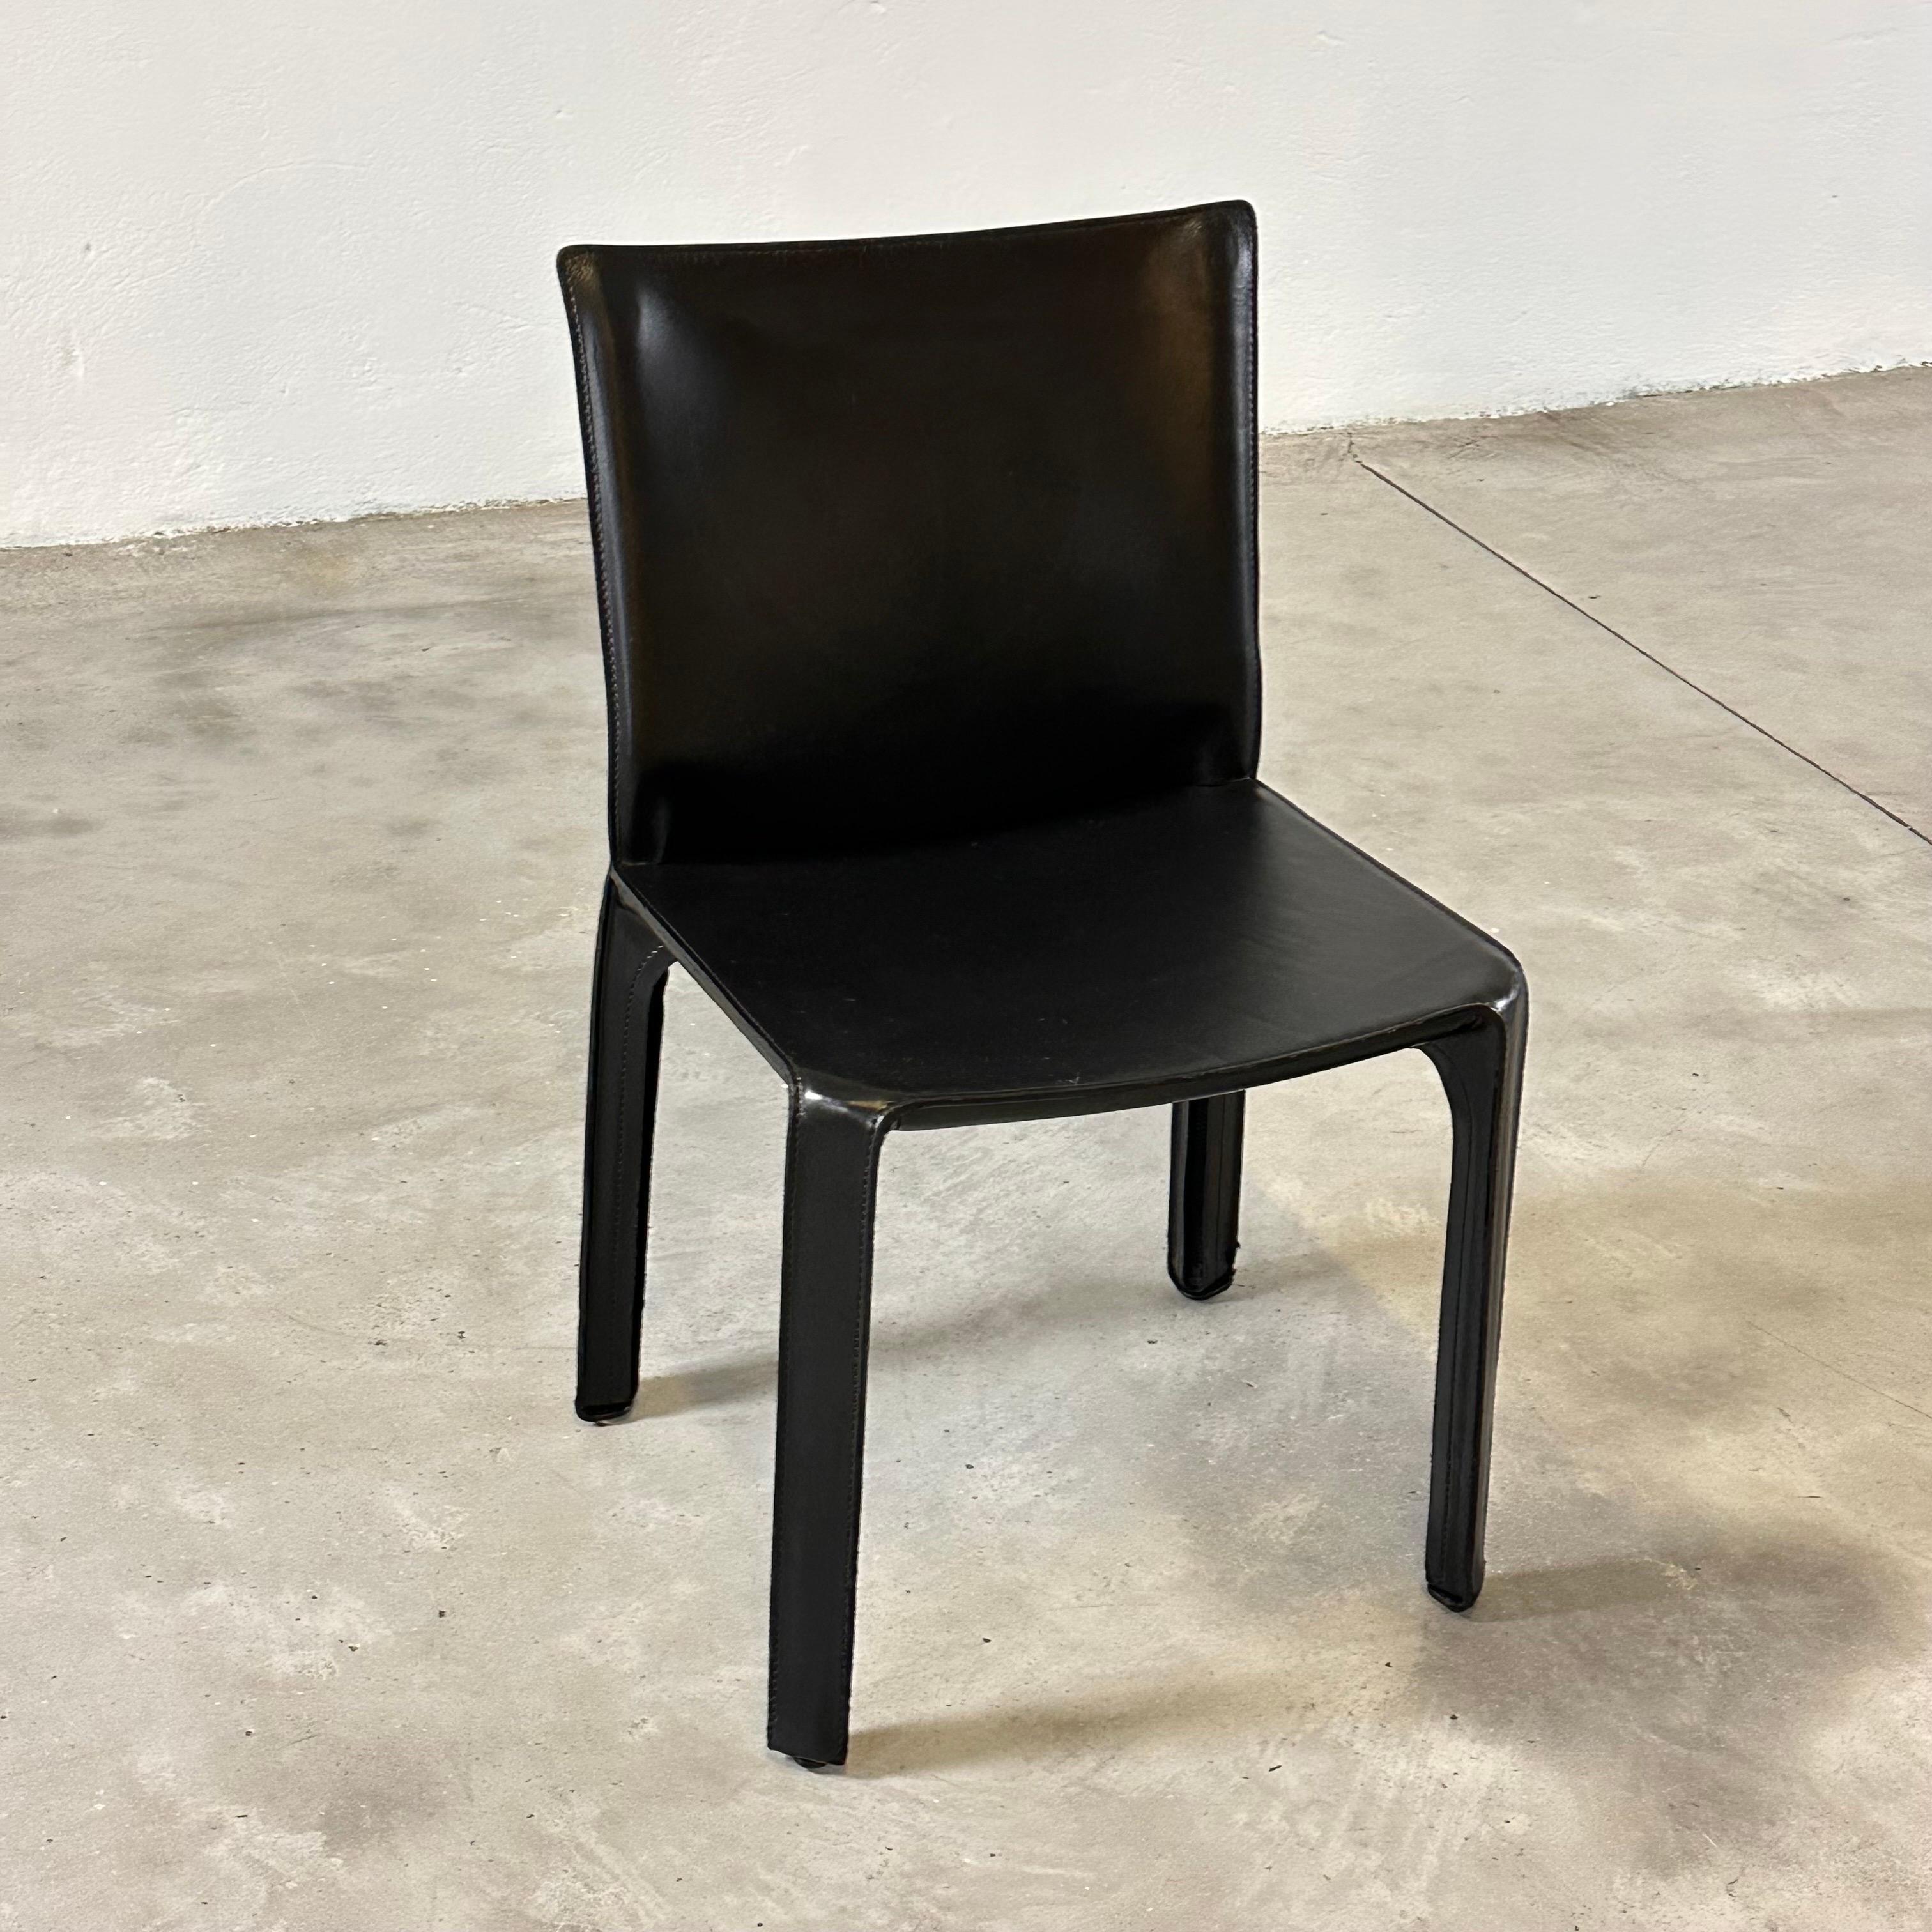 Set of Ten CAB 412 Chairs by Mario Bellini for Cassina in Black Leather, 1970s For Sale 1